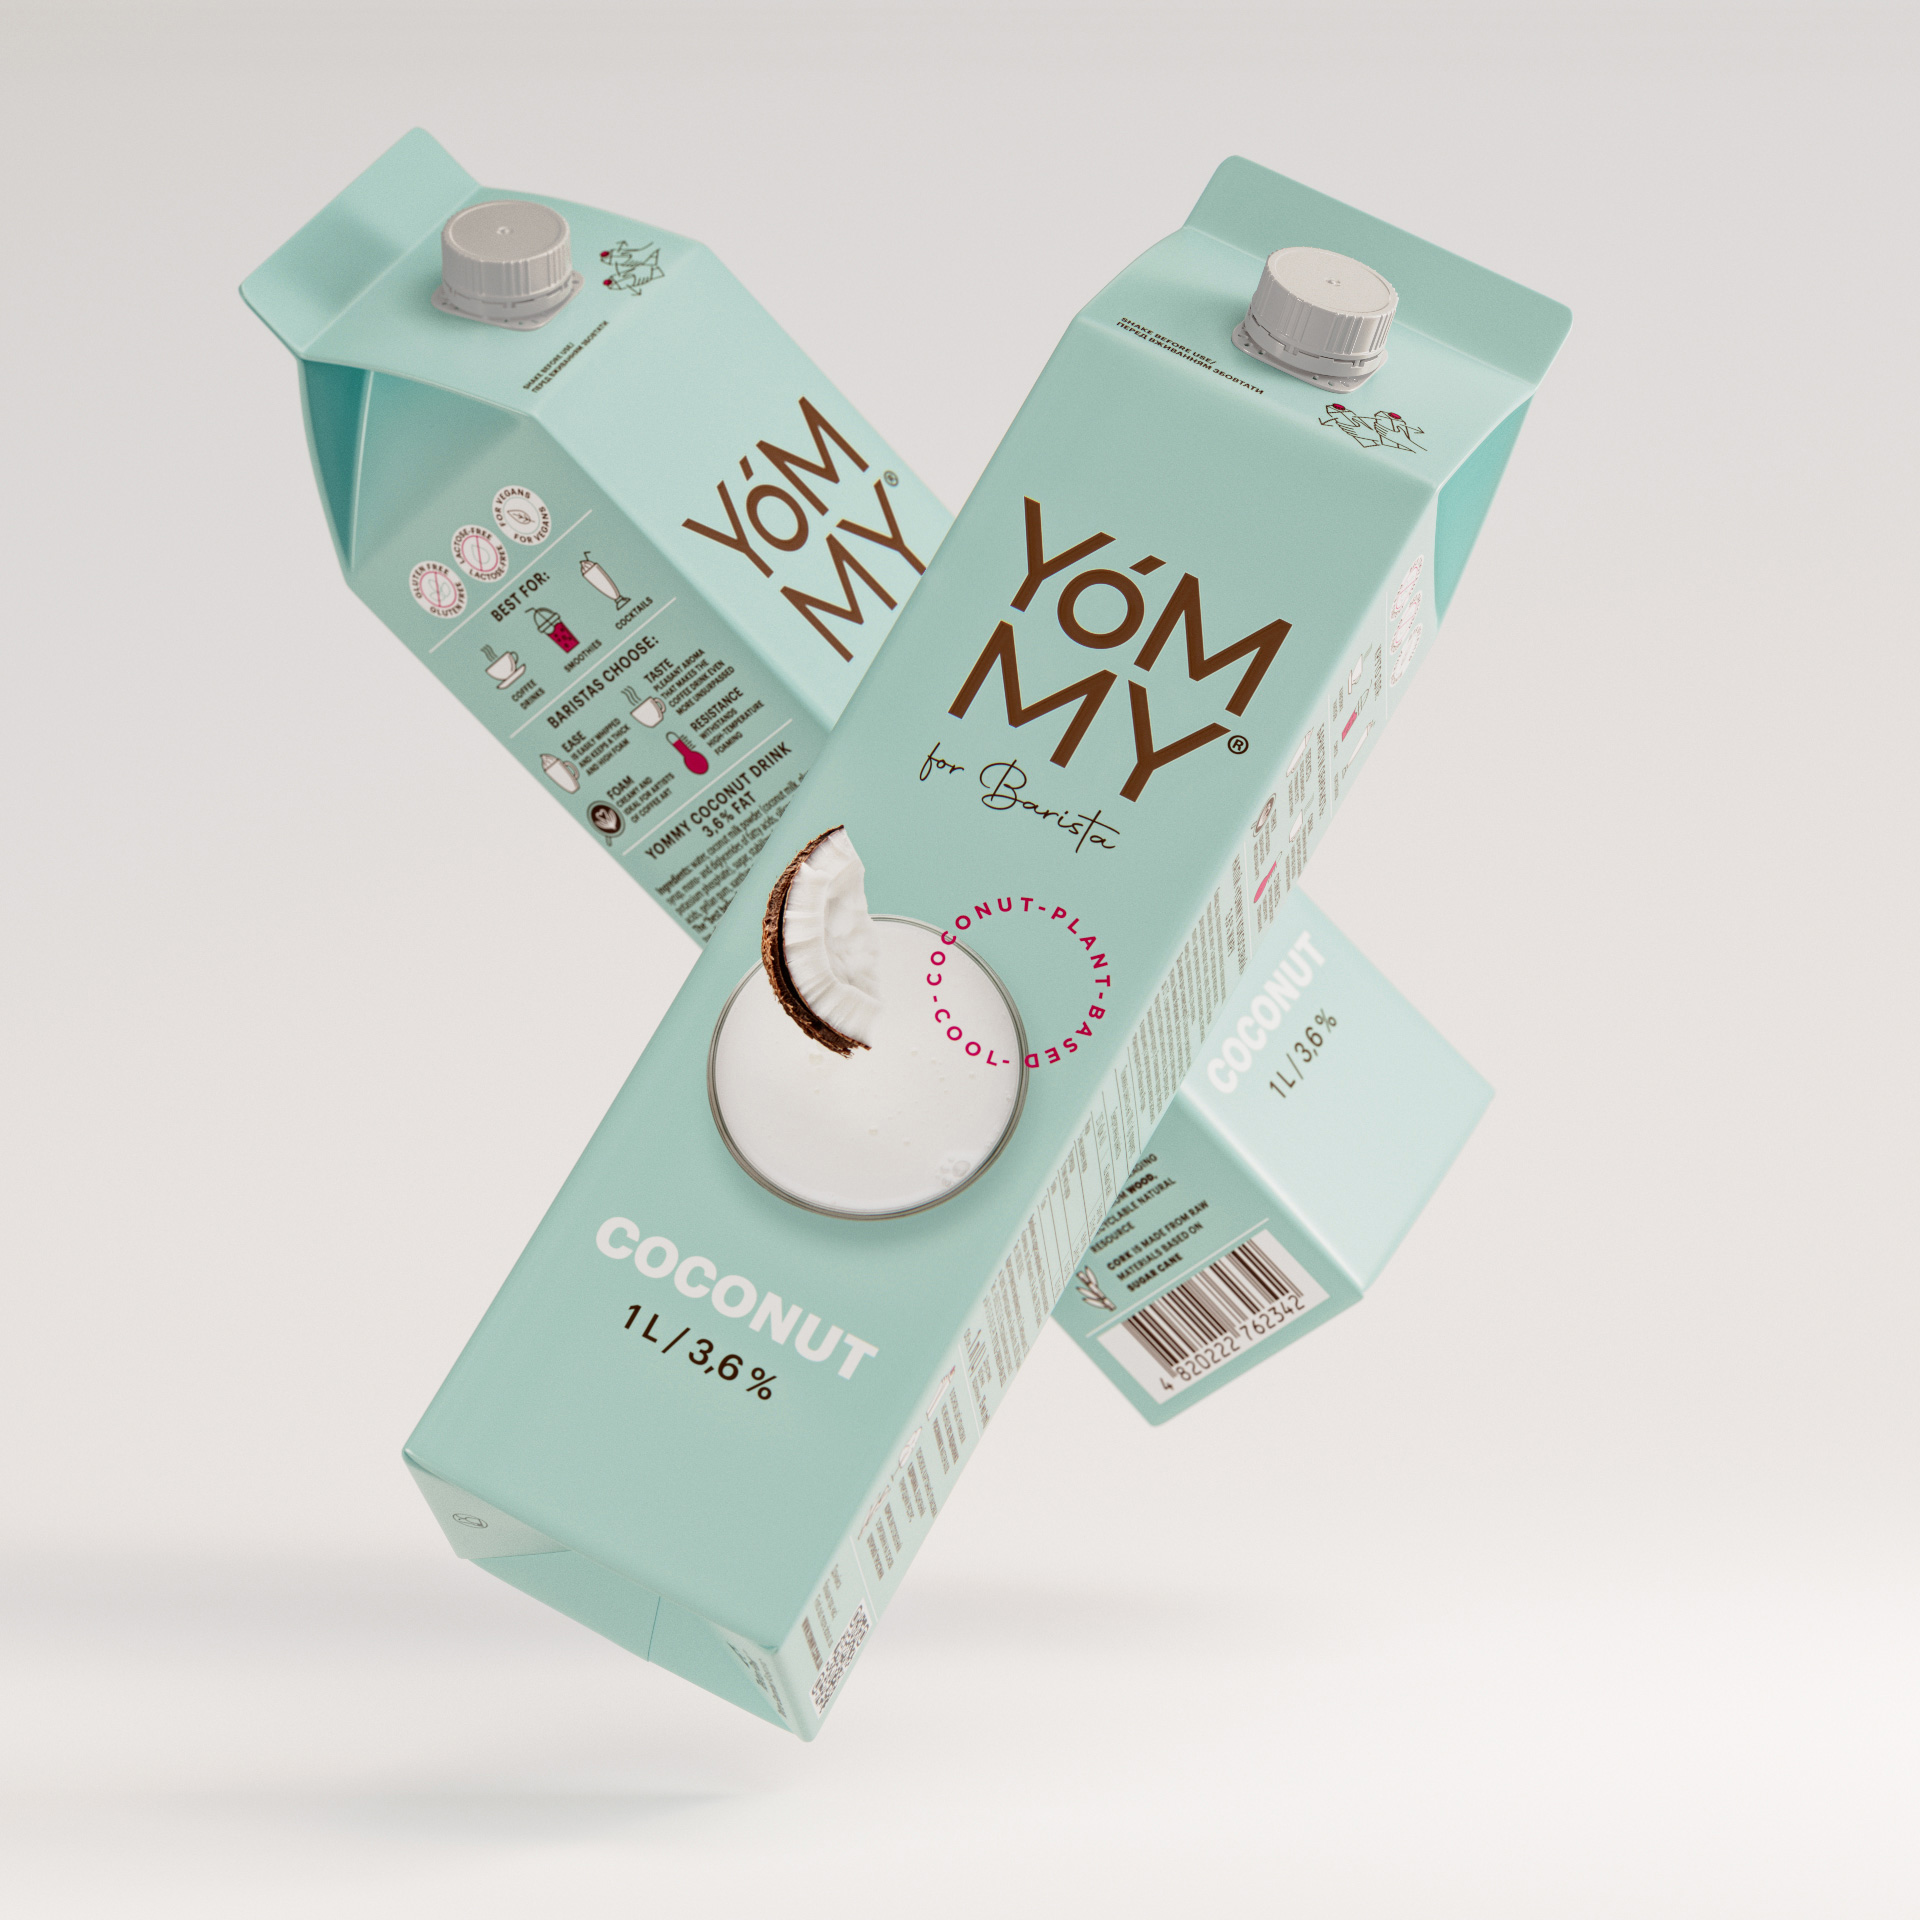 Packaging and Brand Design for Yommy Plant Based Products